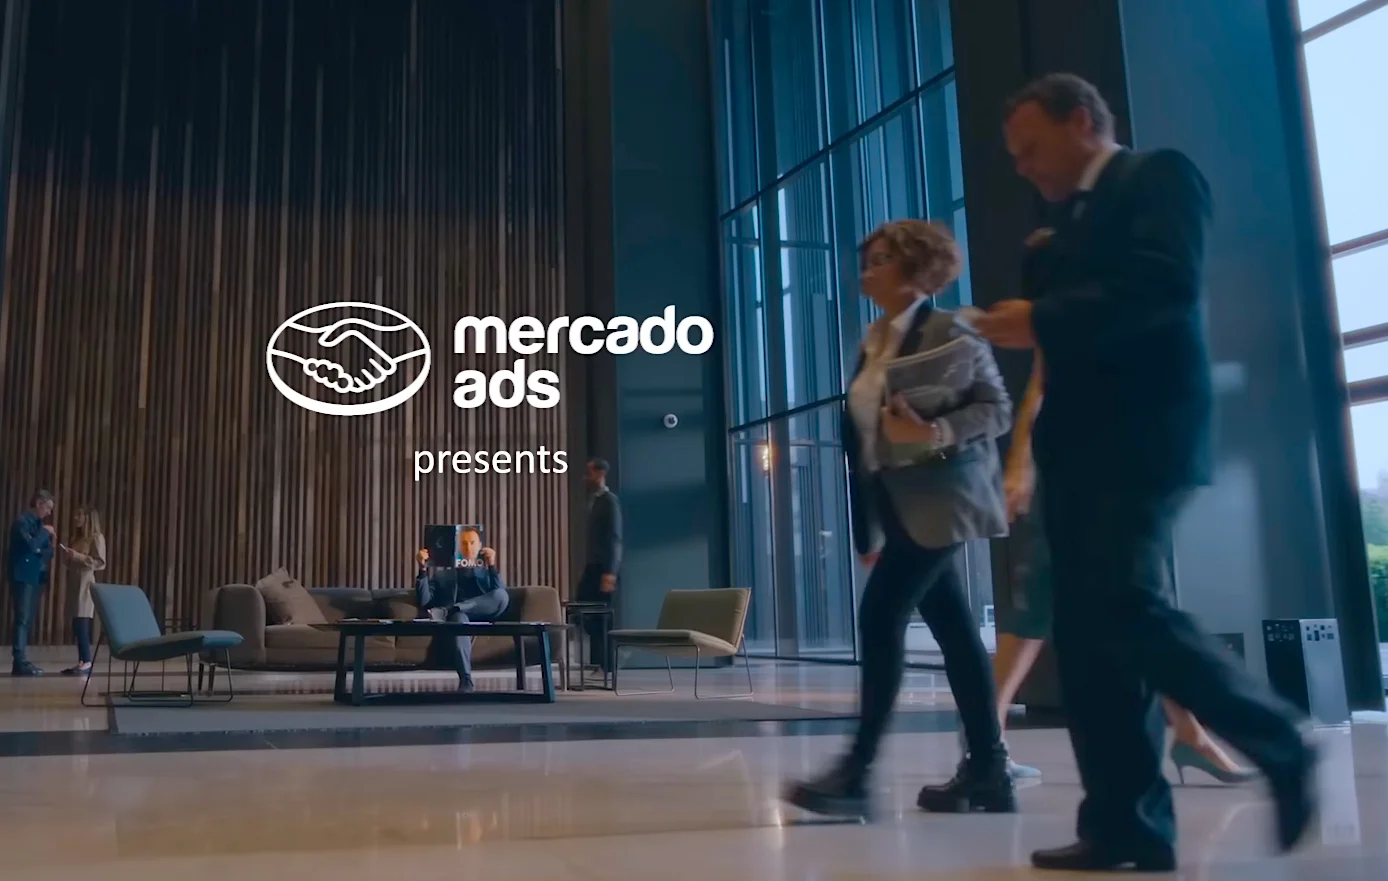 Mercado Ads presentation in a modern office lobby with people walking and sitting. FOMA